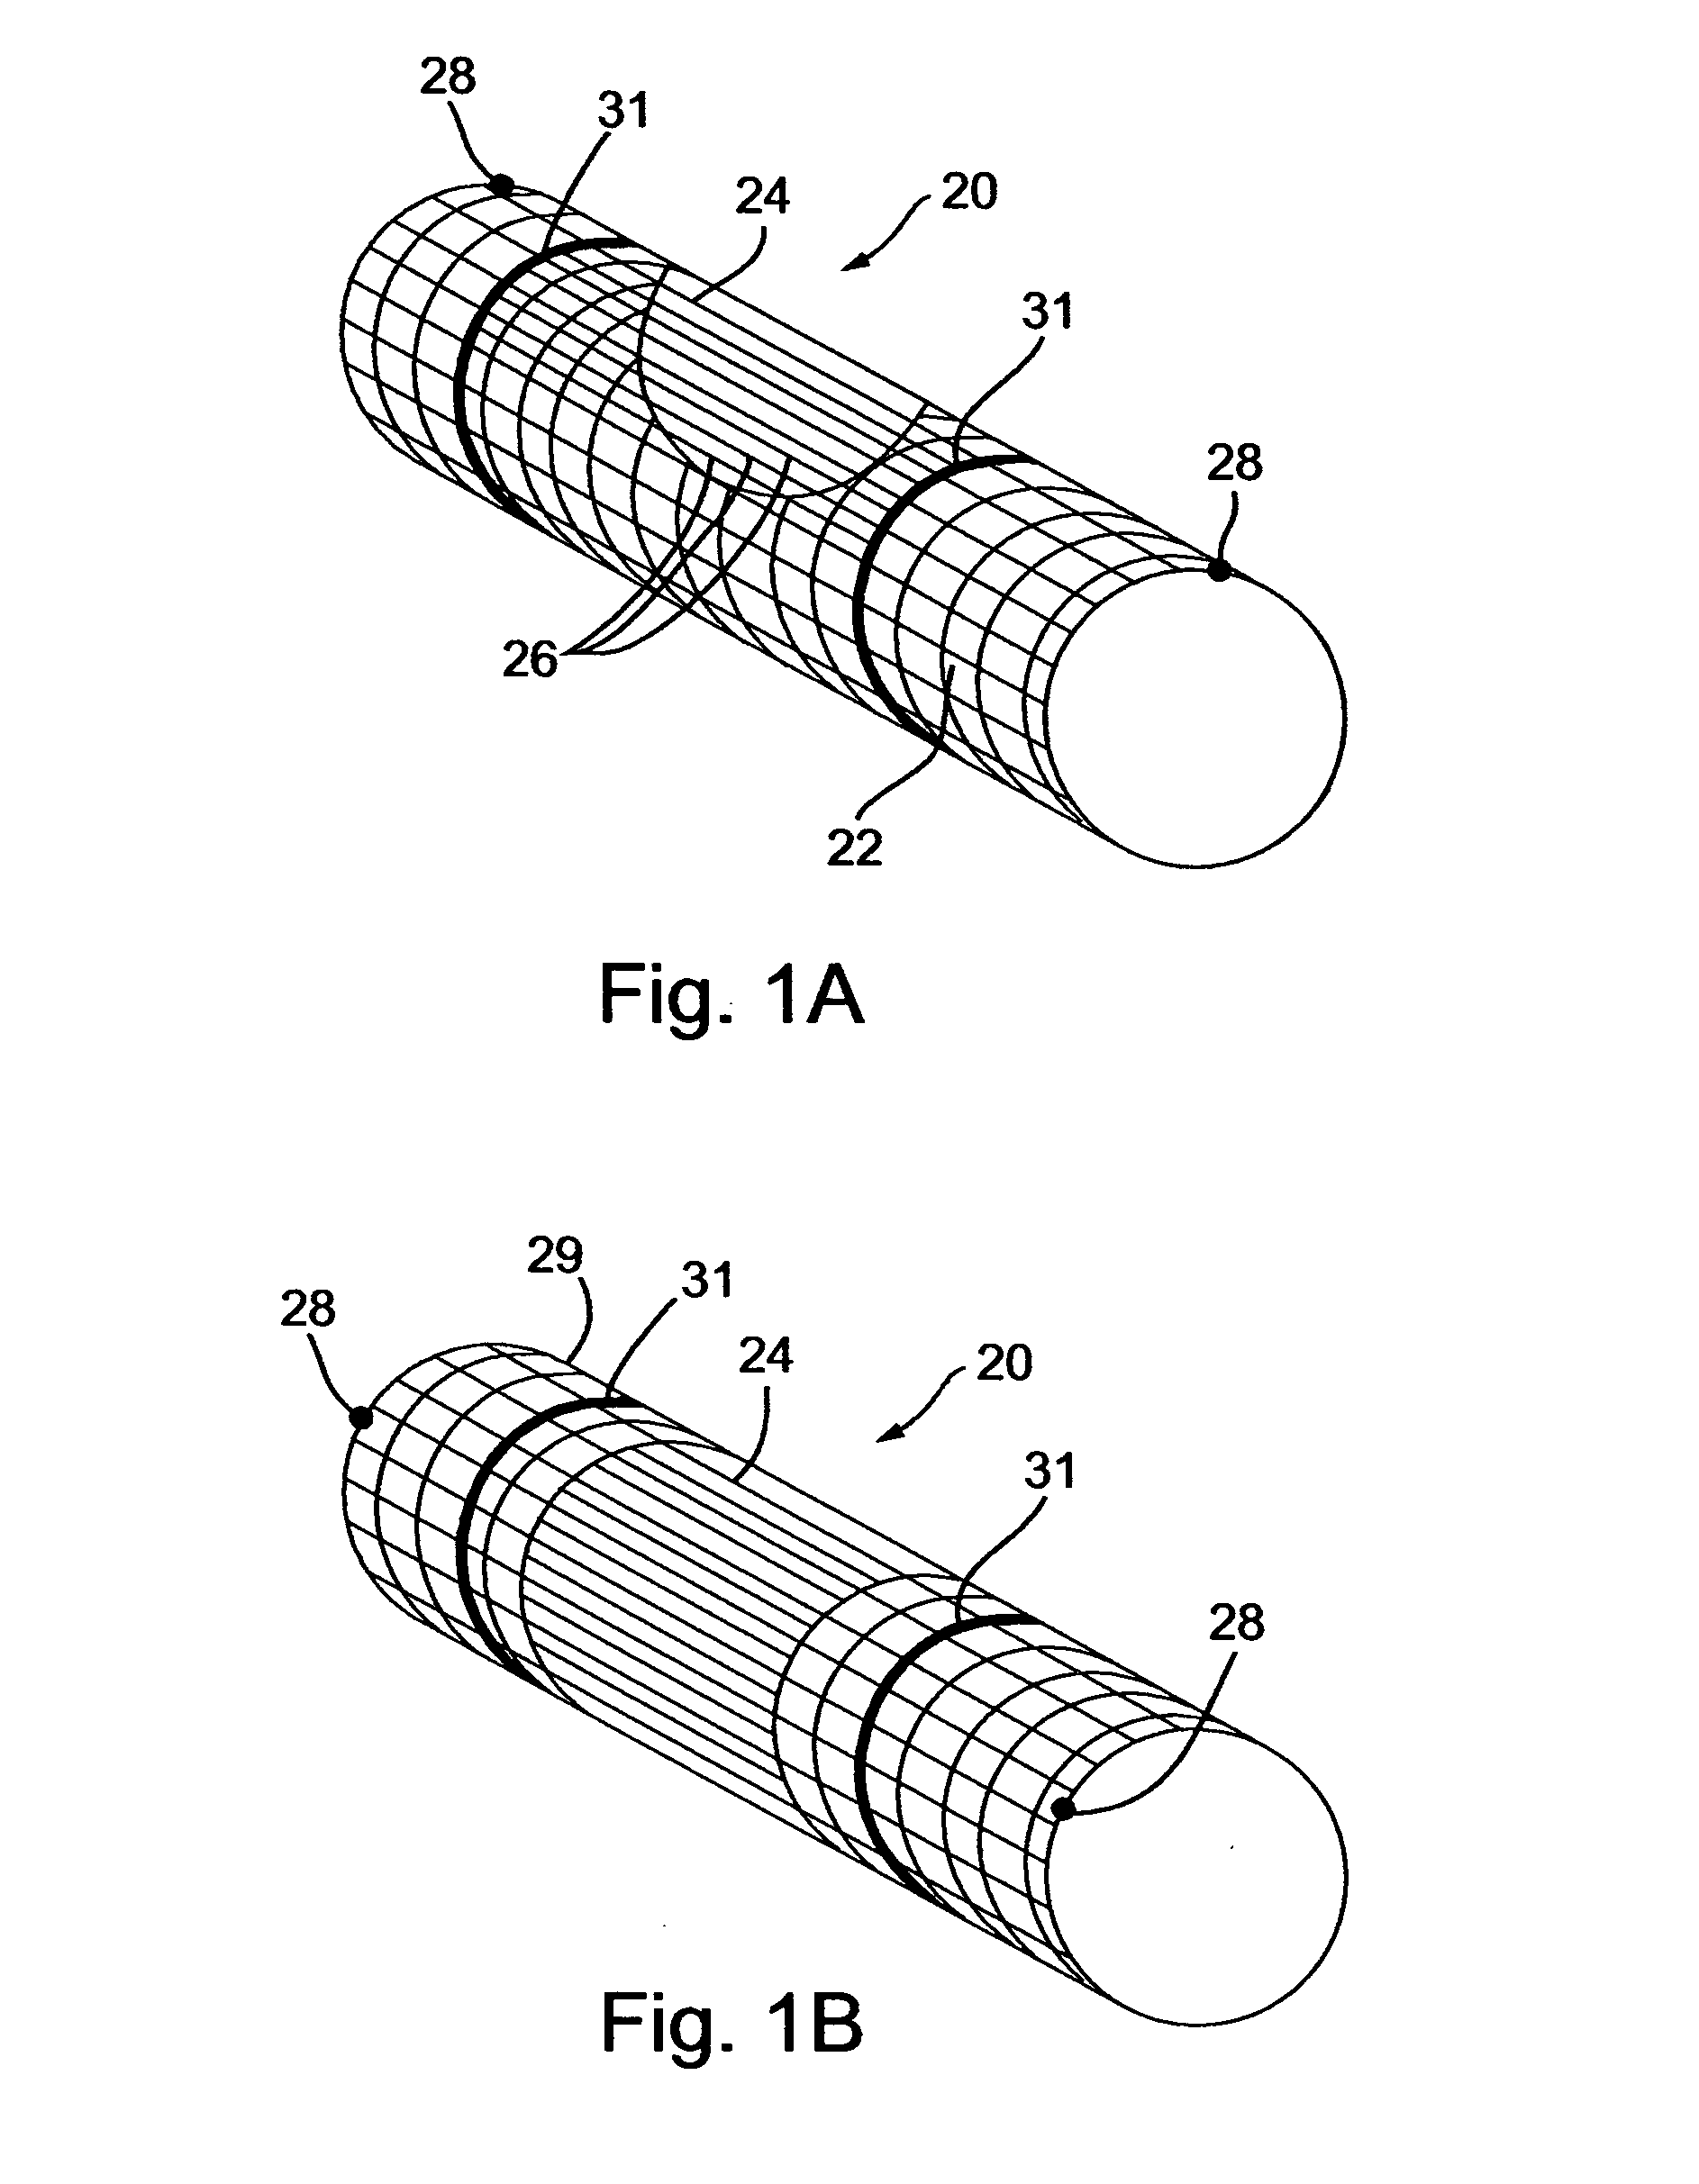 Implantable composite device and corresponding method for deflecting embolic material in blood flowing at an arterial bifurcation